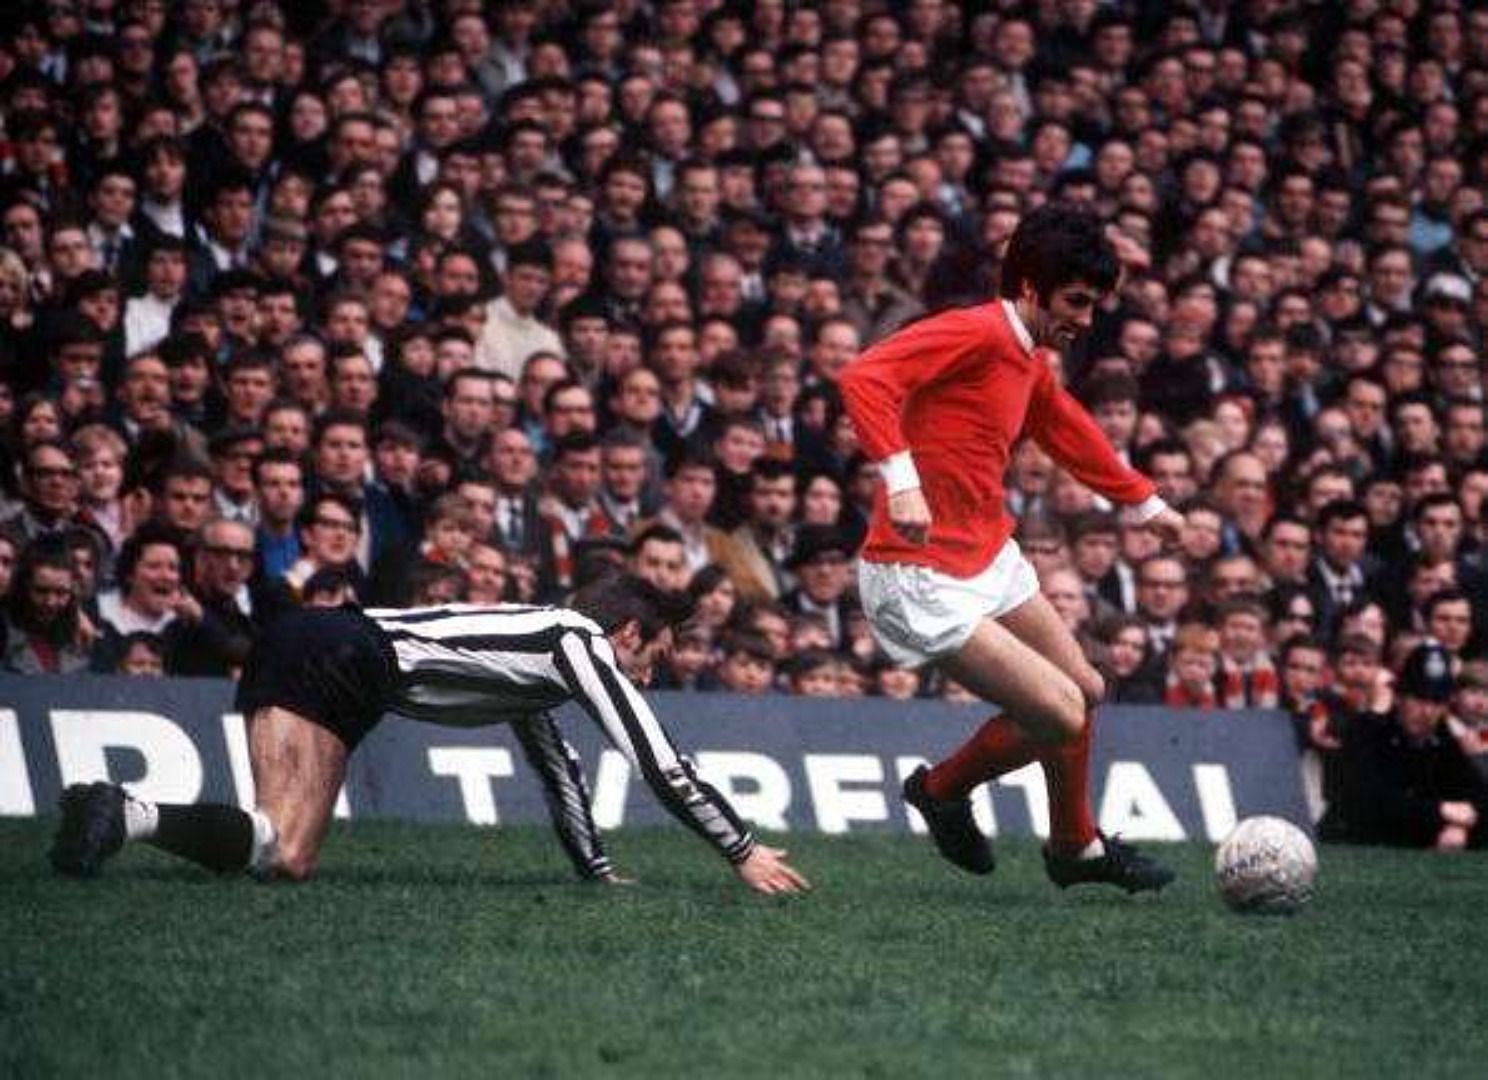 George Best doing what he is best at.